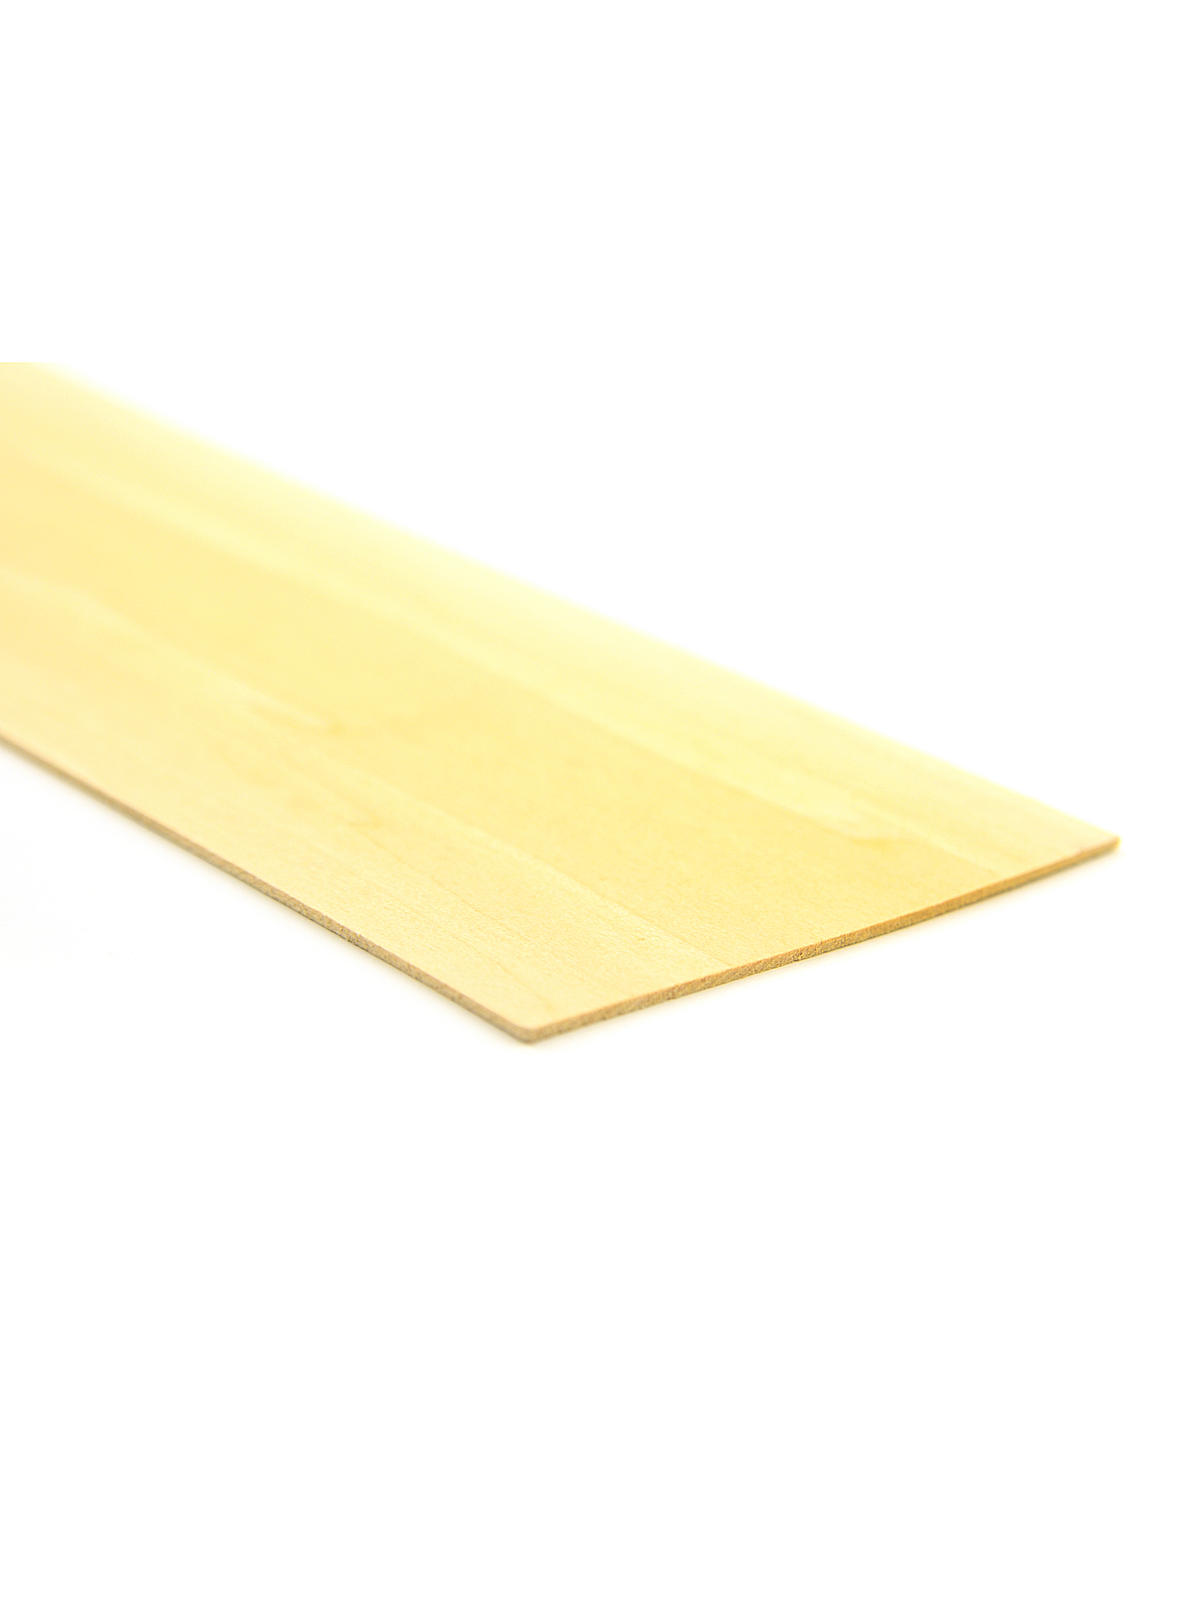 Basswood Sheets 1 16 In. 4 In. X 24 In.